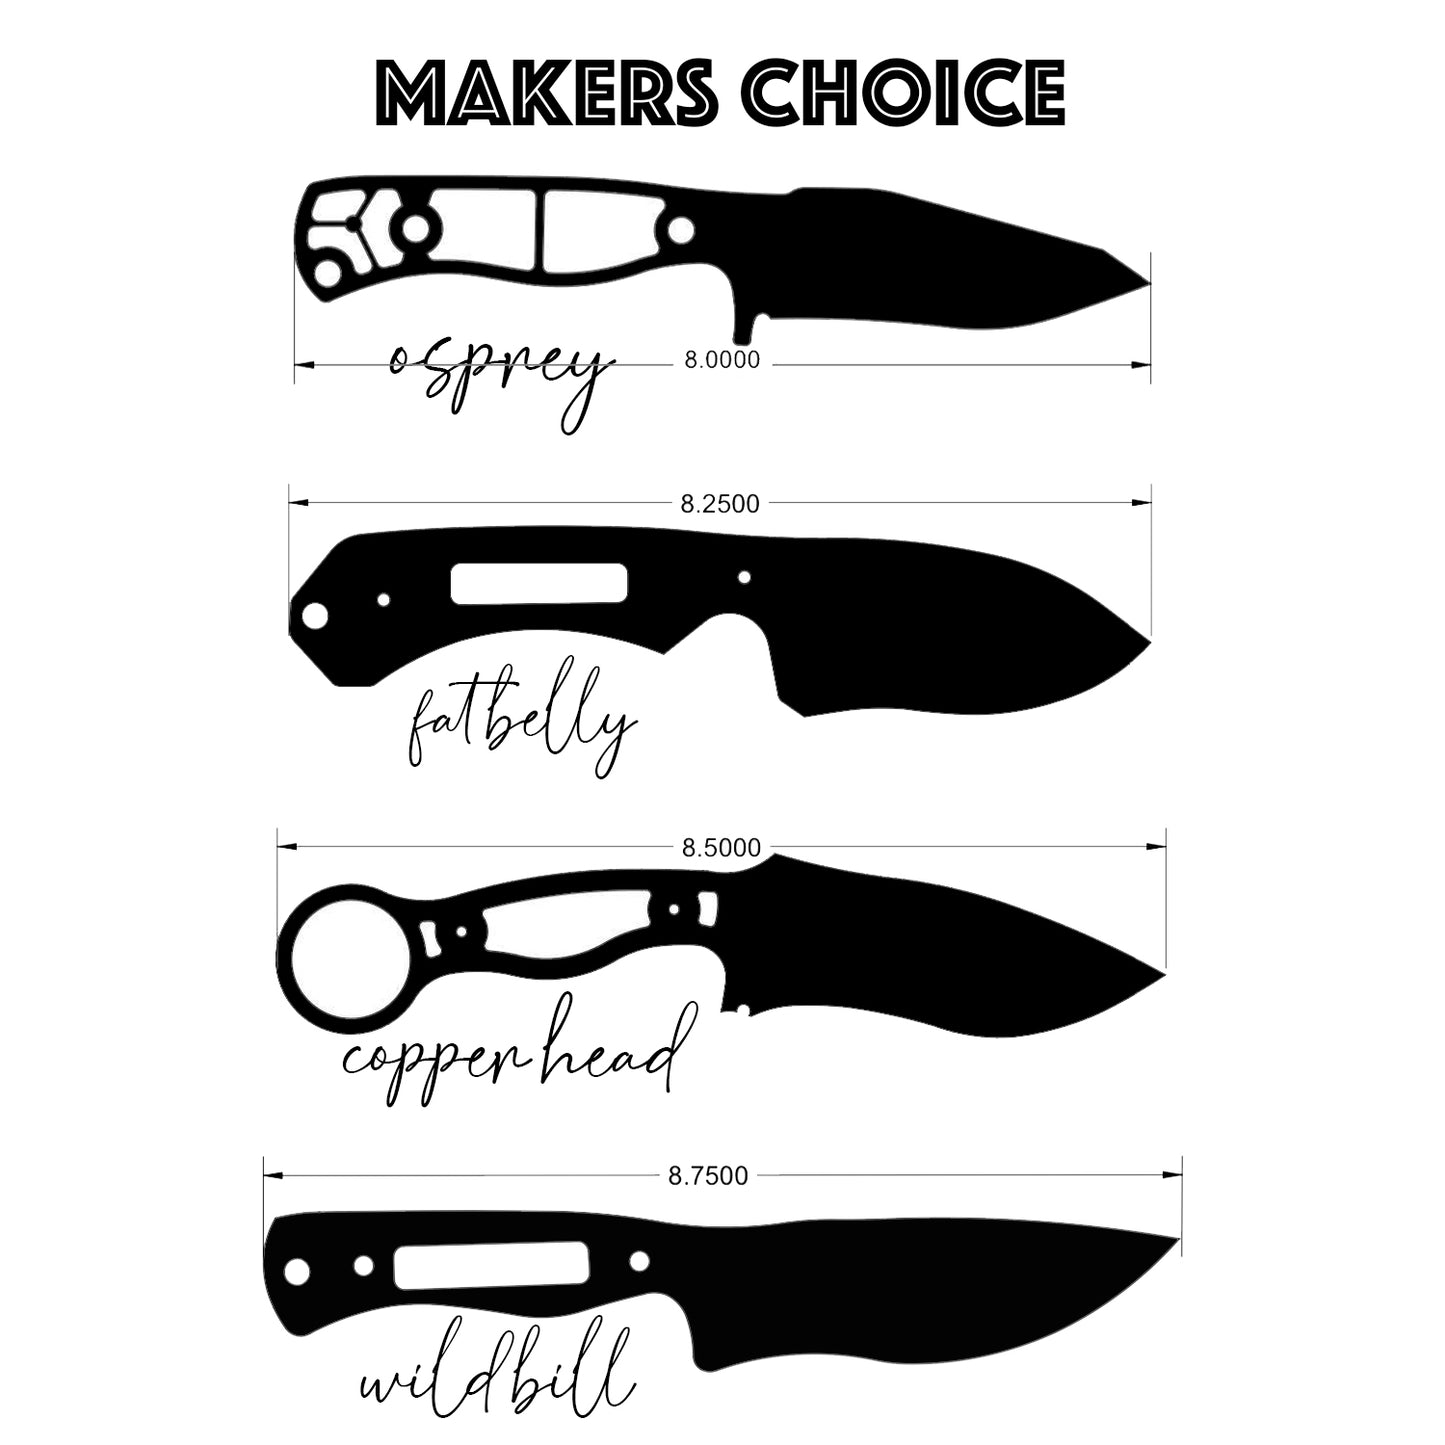 Makers Choice